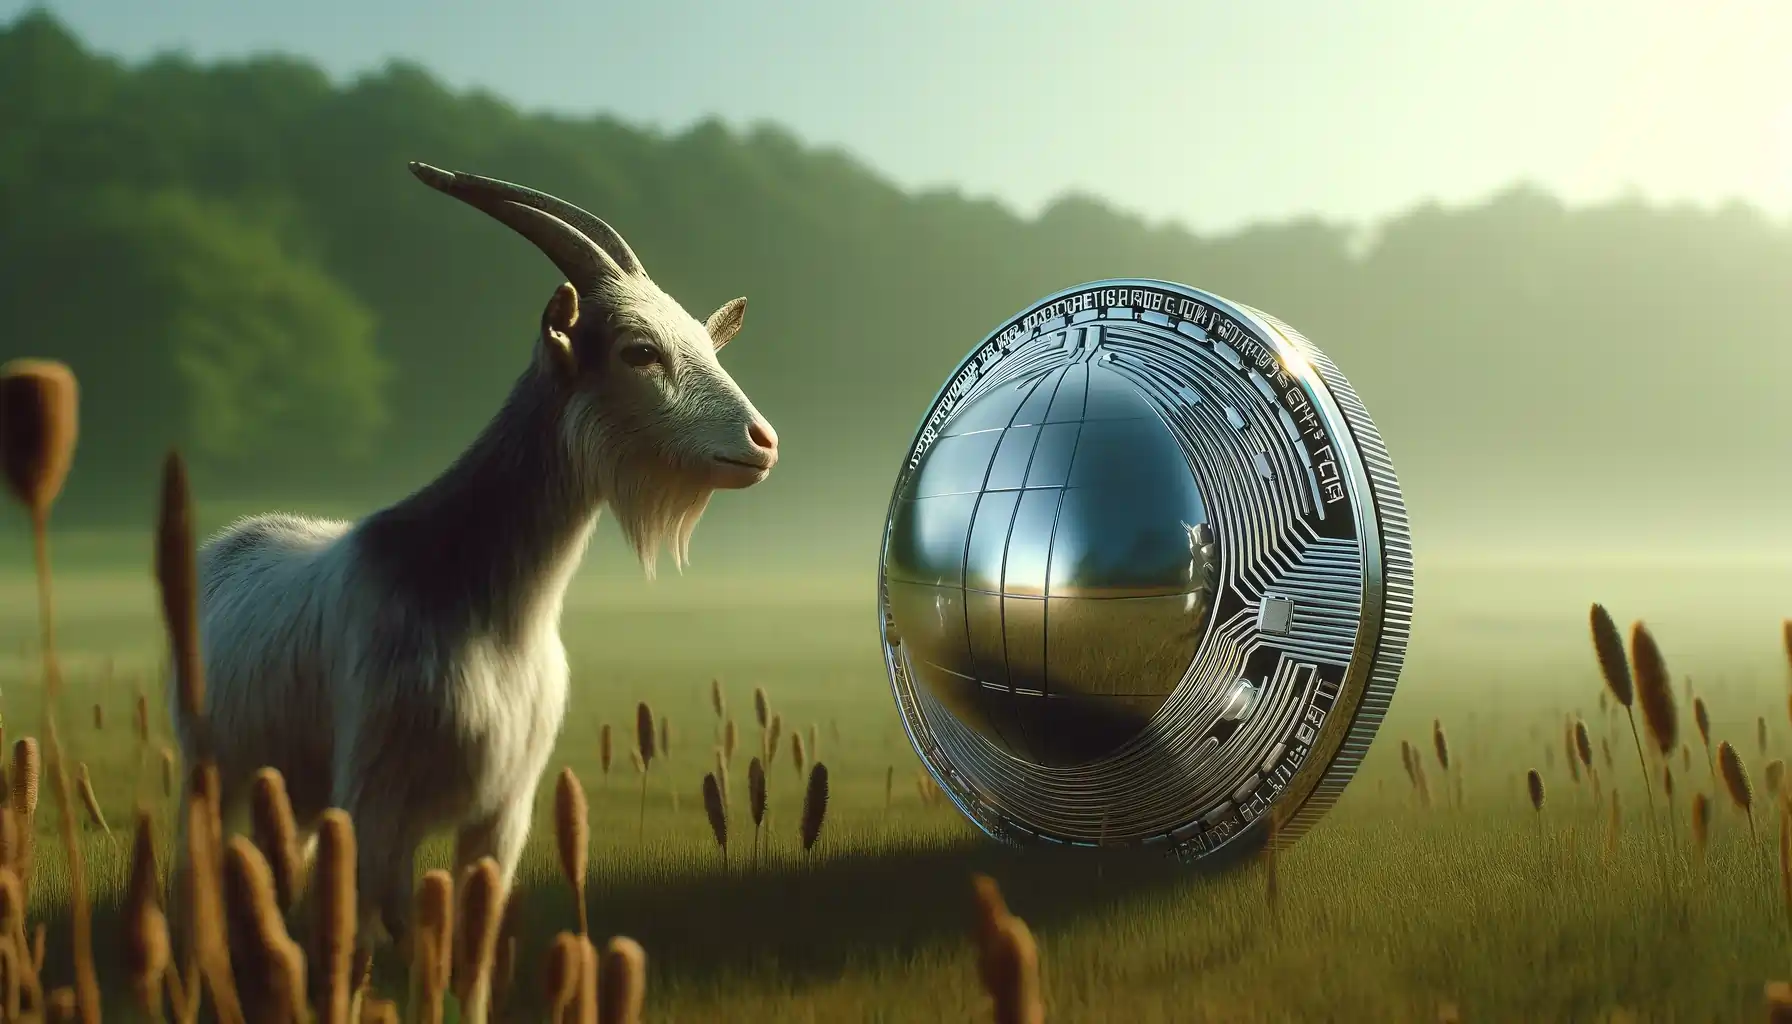 Worldcoin reaches 10M users, 70M transactions and at least 13 goats bought